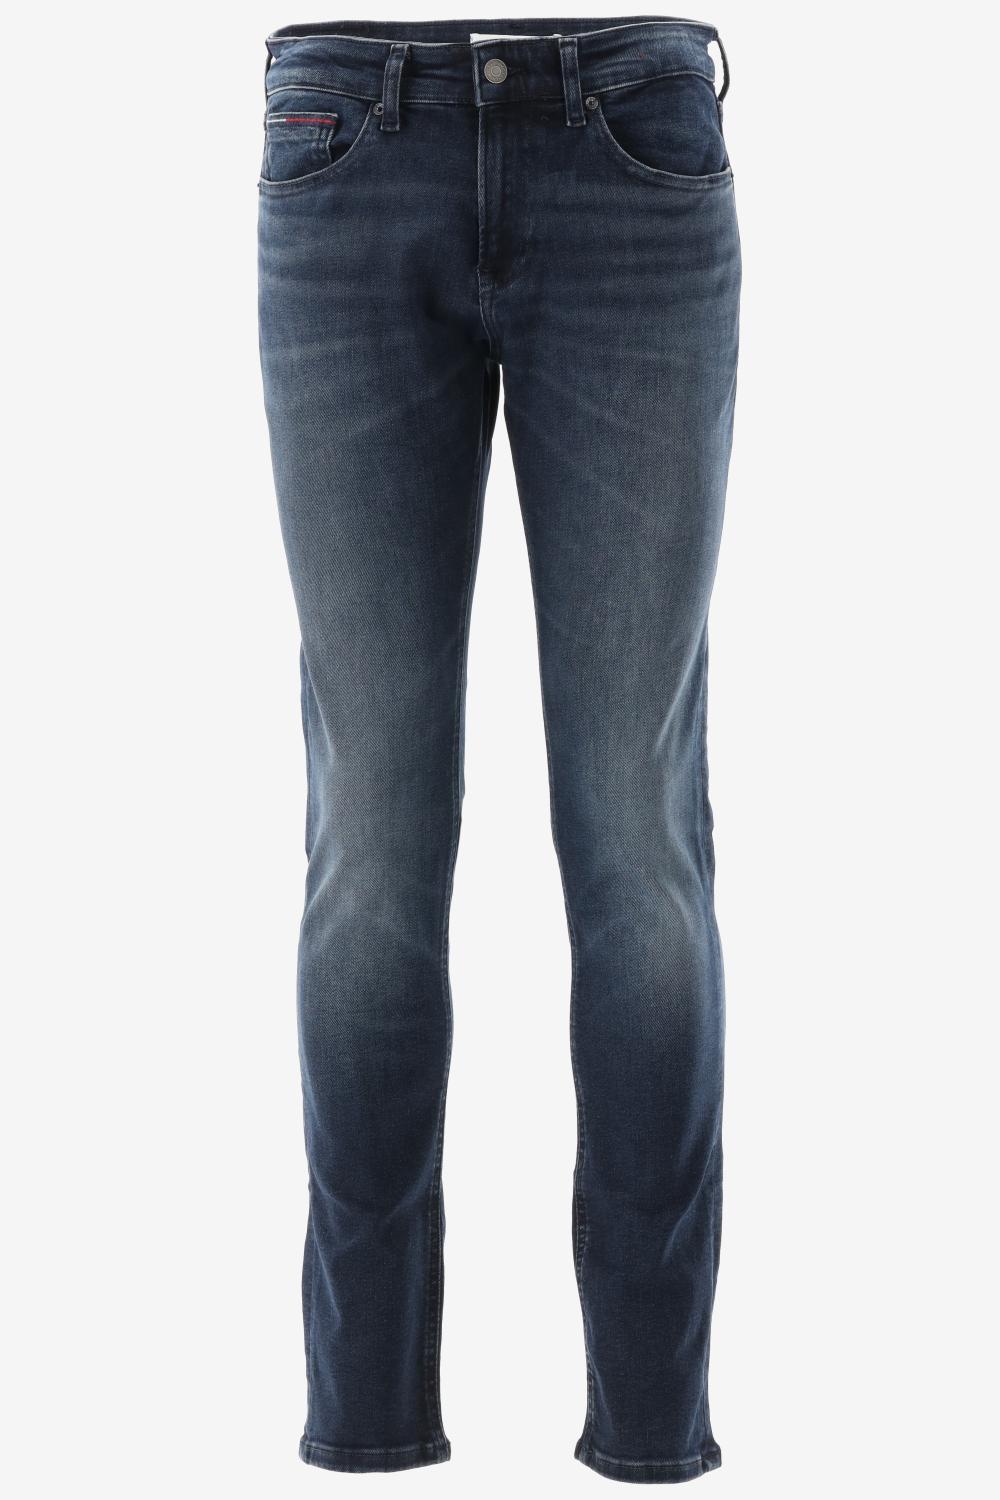 Tommy Jeans Jeans - Slim Fit - Blauw - 36-36